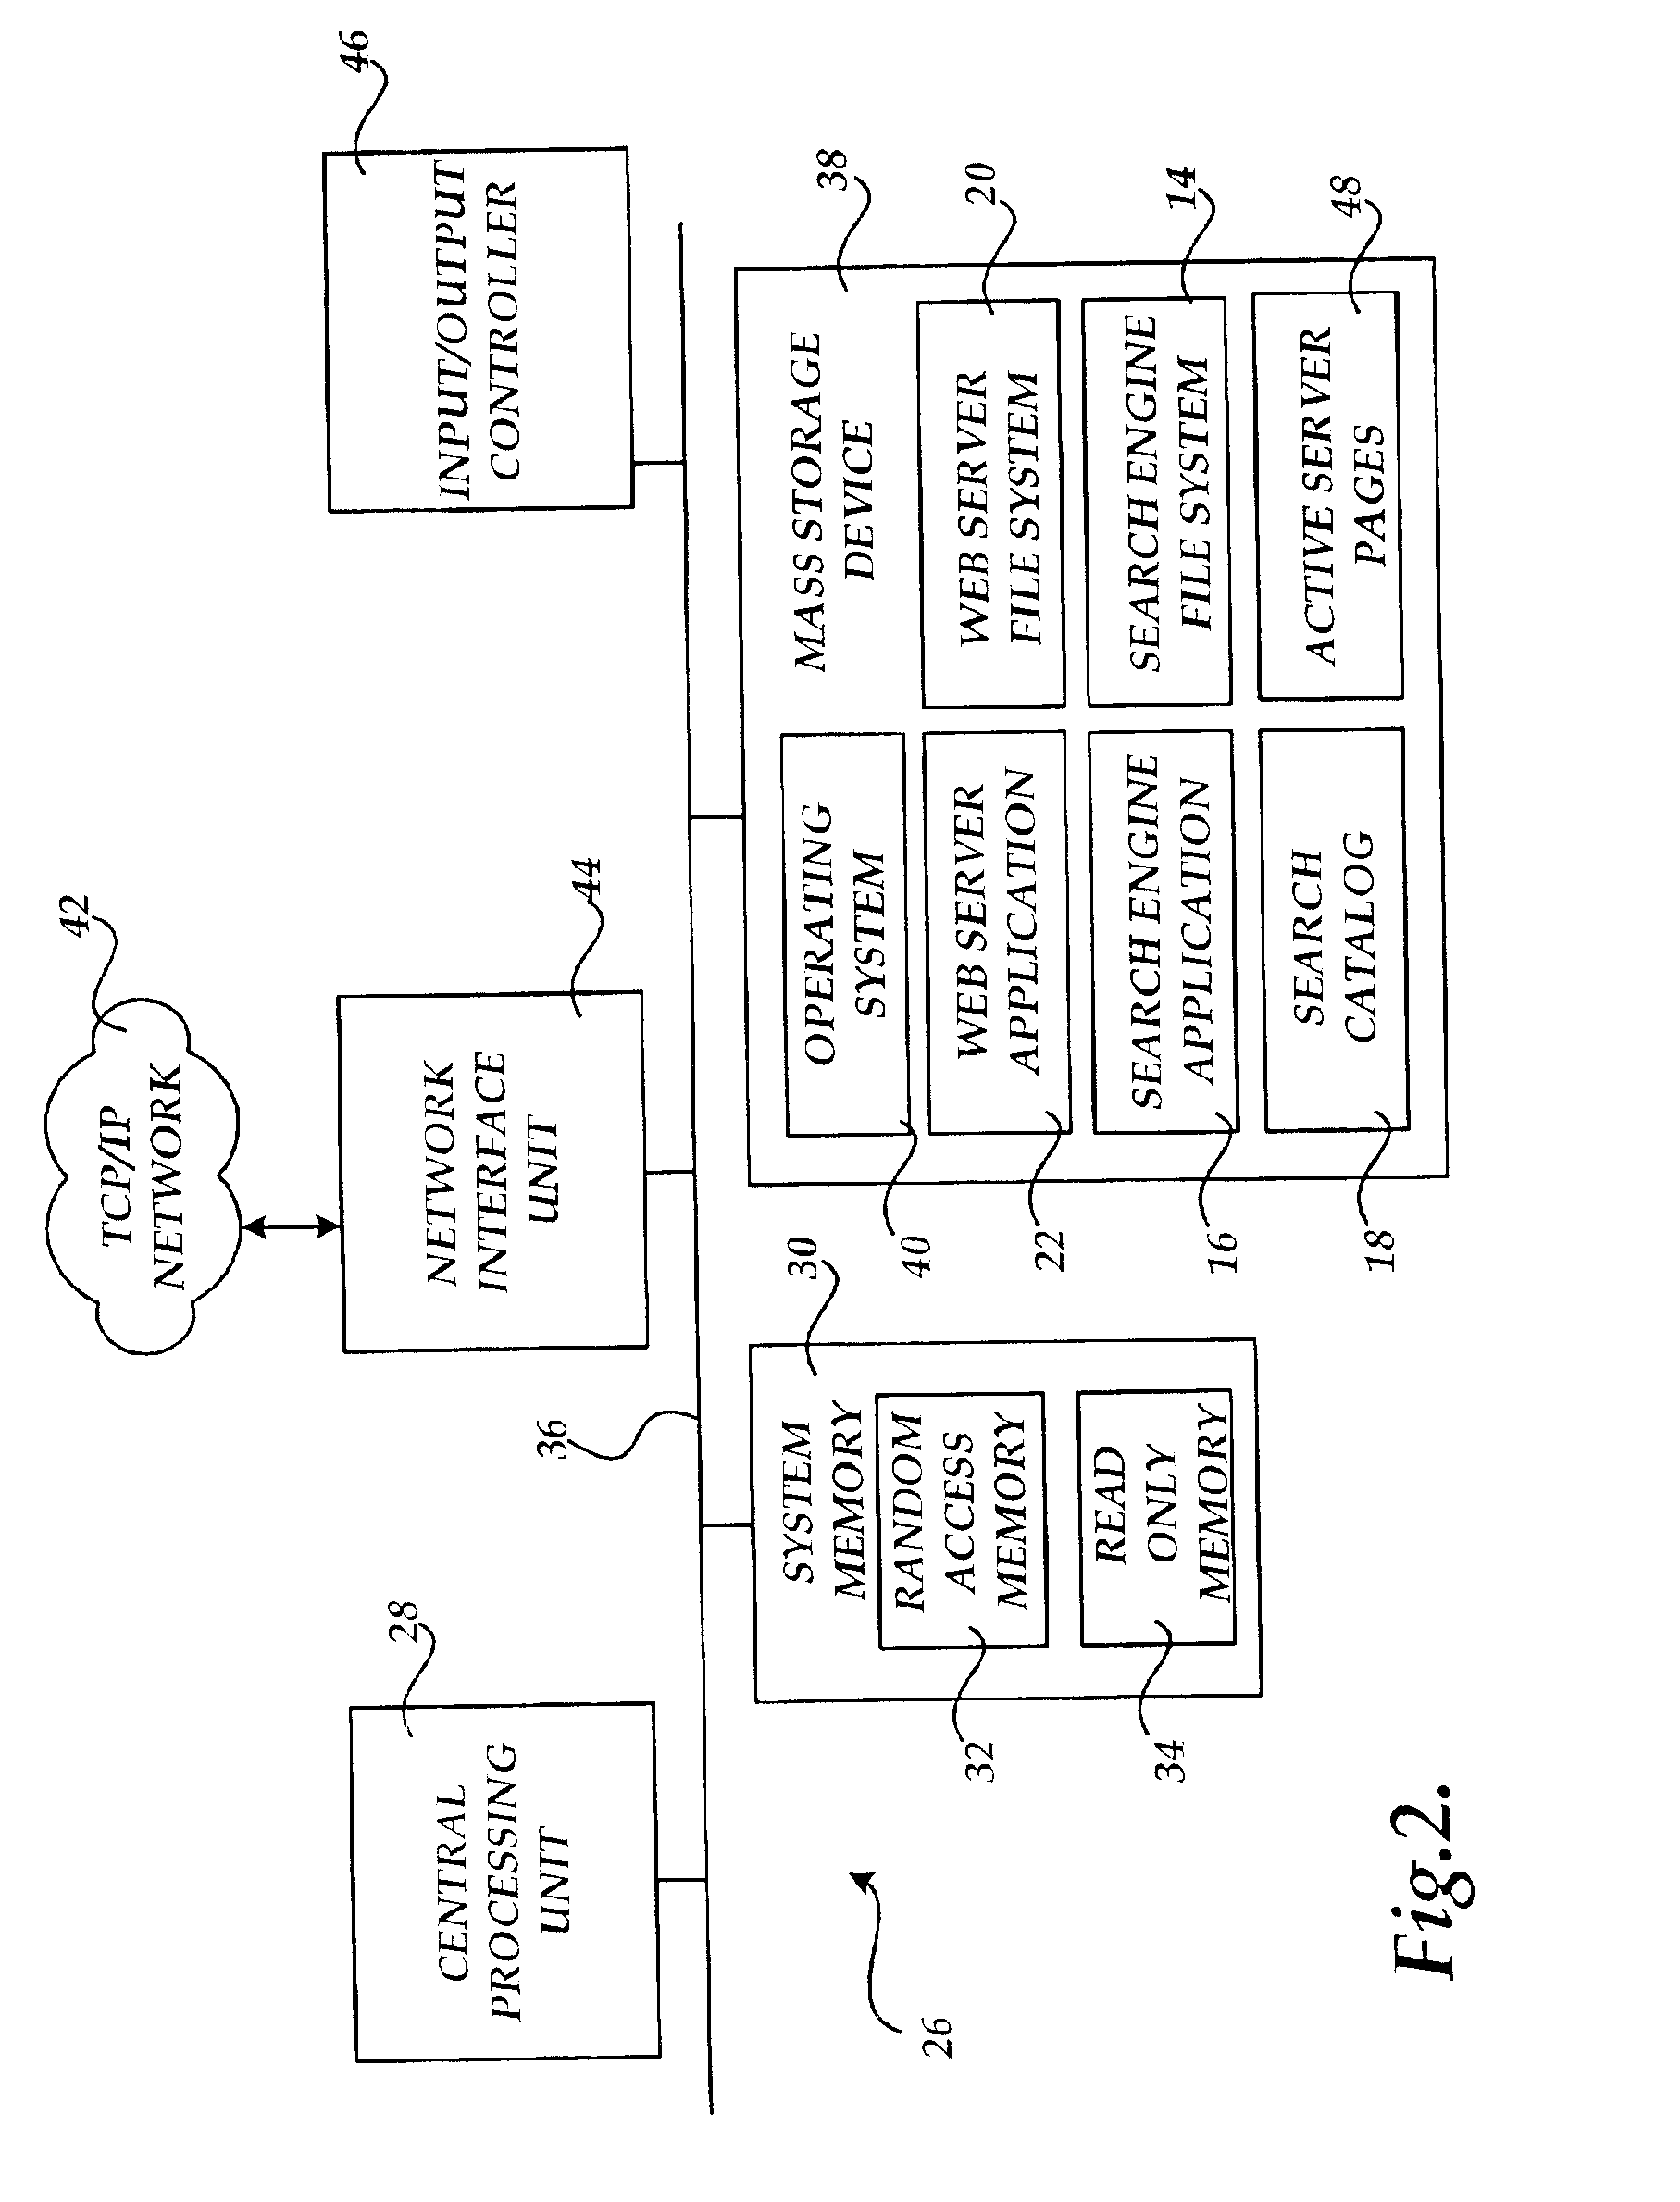 Method, apparatus, and computer-readable medium for searching and navigating a document database